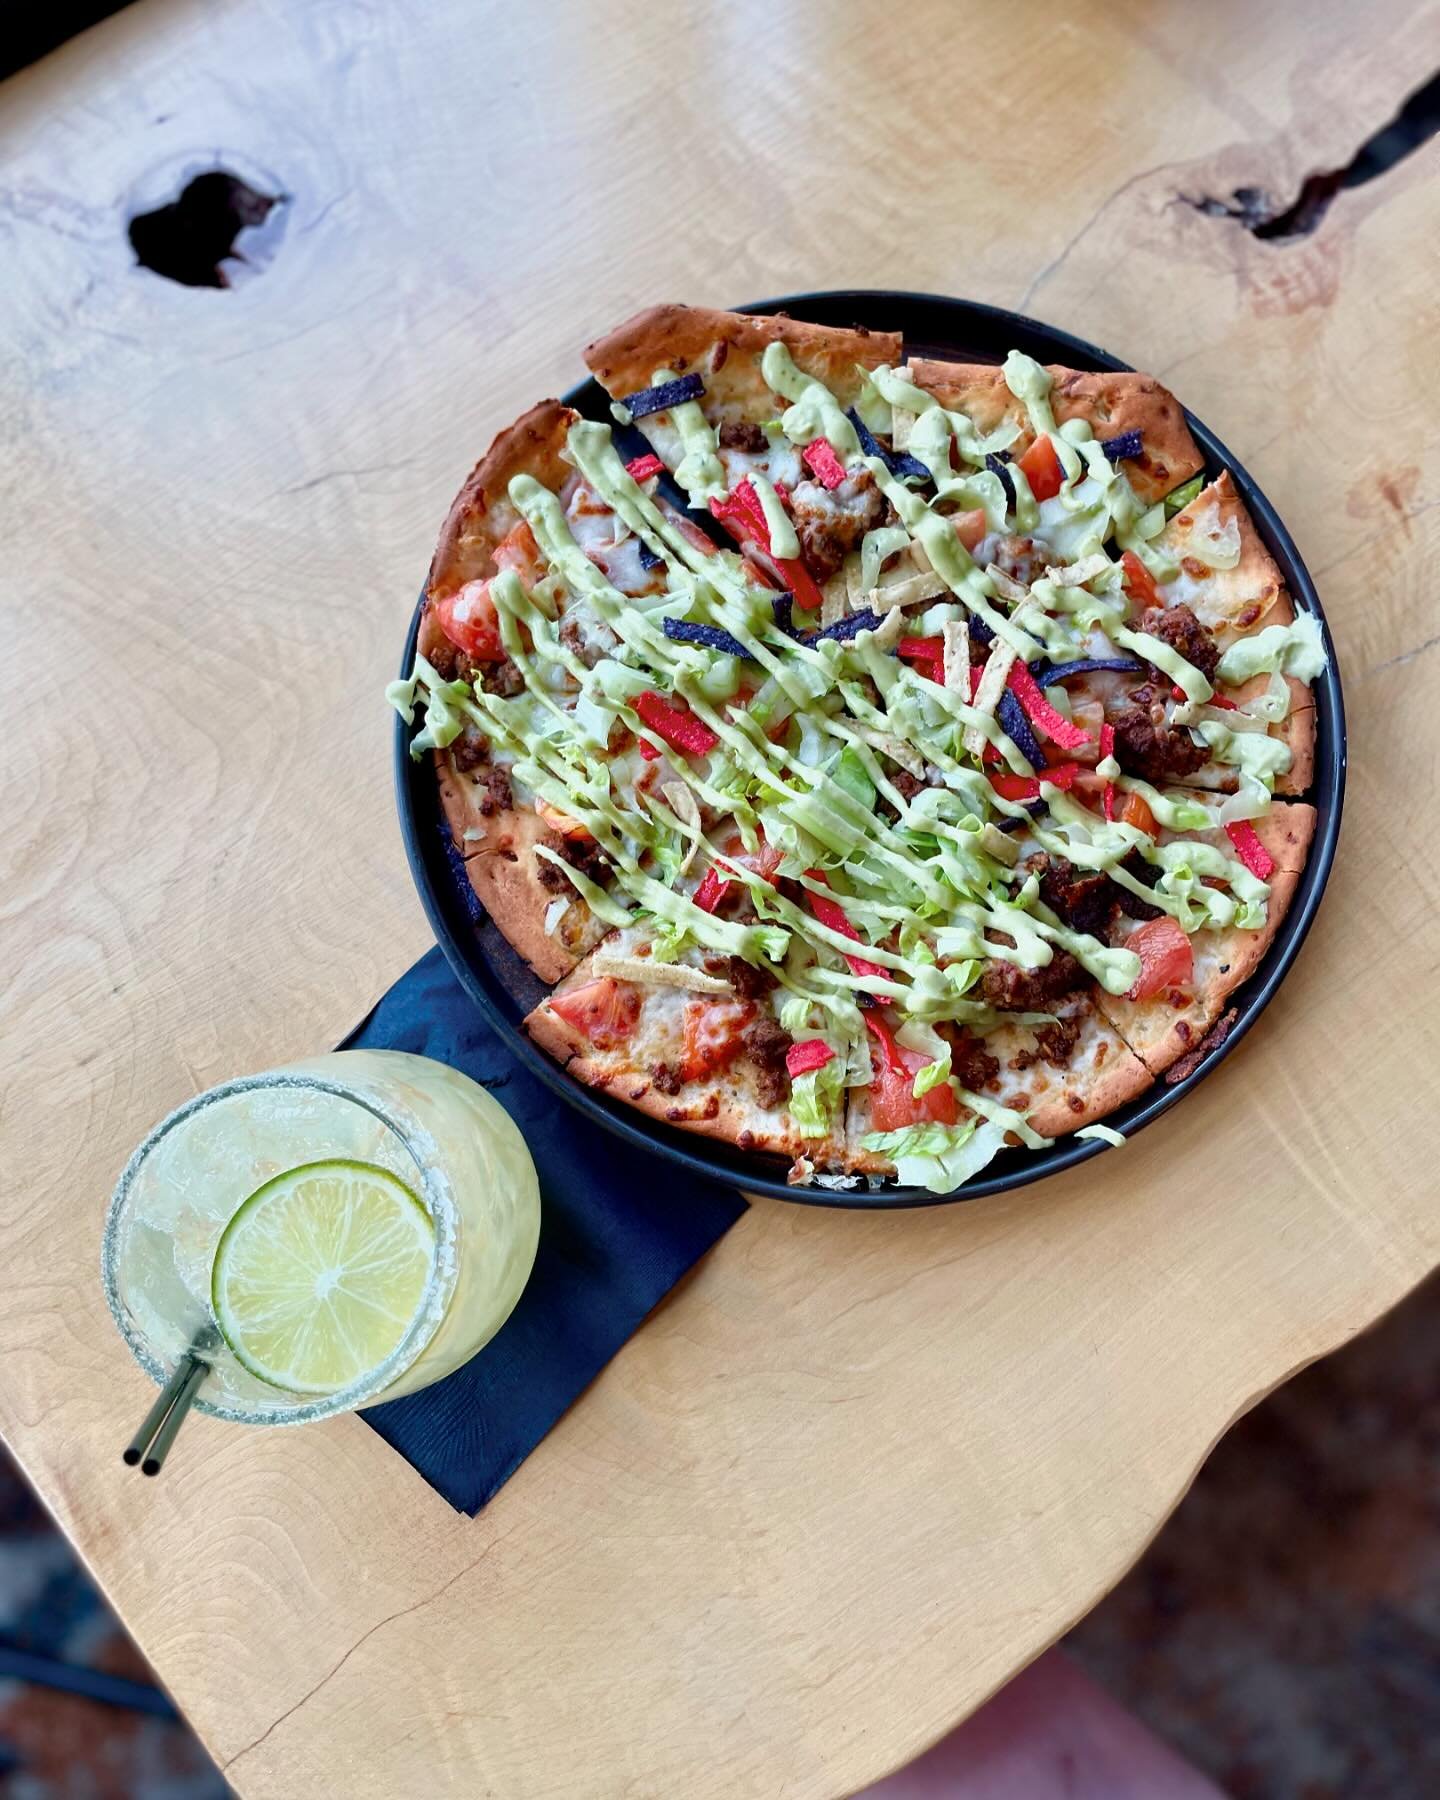 Taco Flatbread Special. Try one of our Special Margaritas too. Stop by and give it a try today ‼️#taco #pizza #flatbreads #alwaysdelicious #lunchspecial #sturbridge #putnamct #